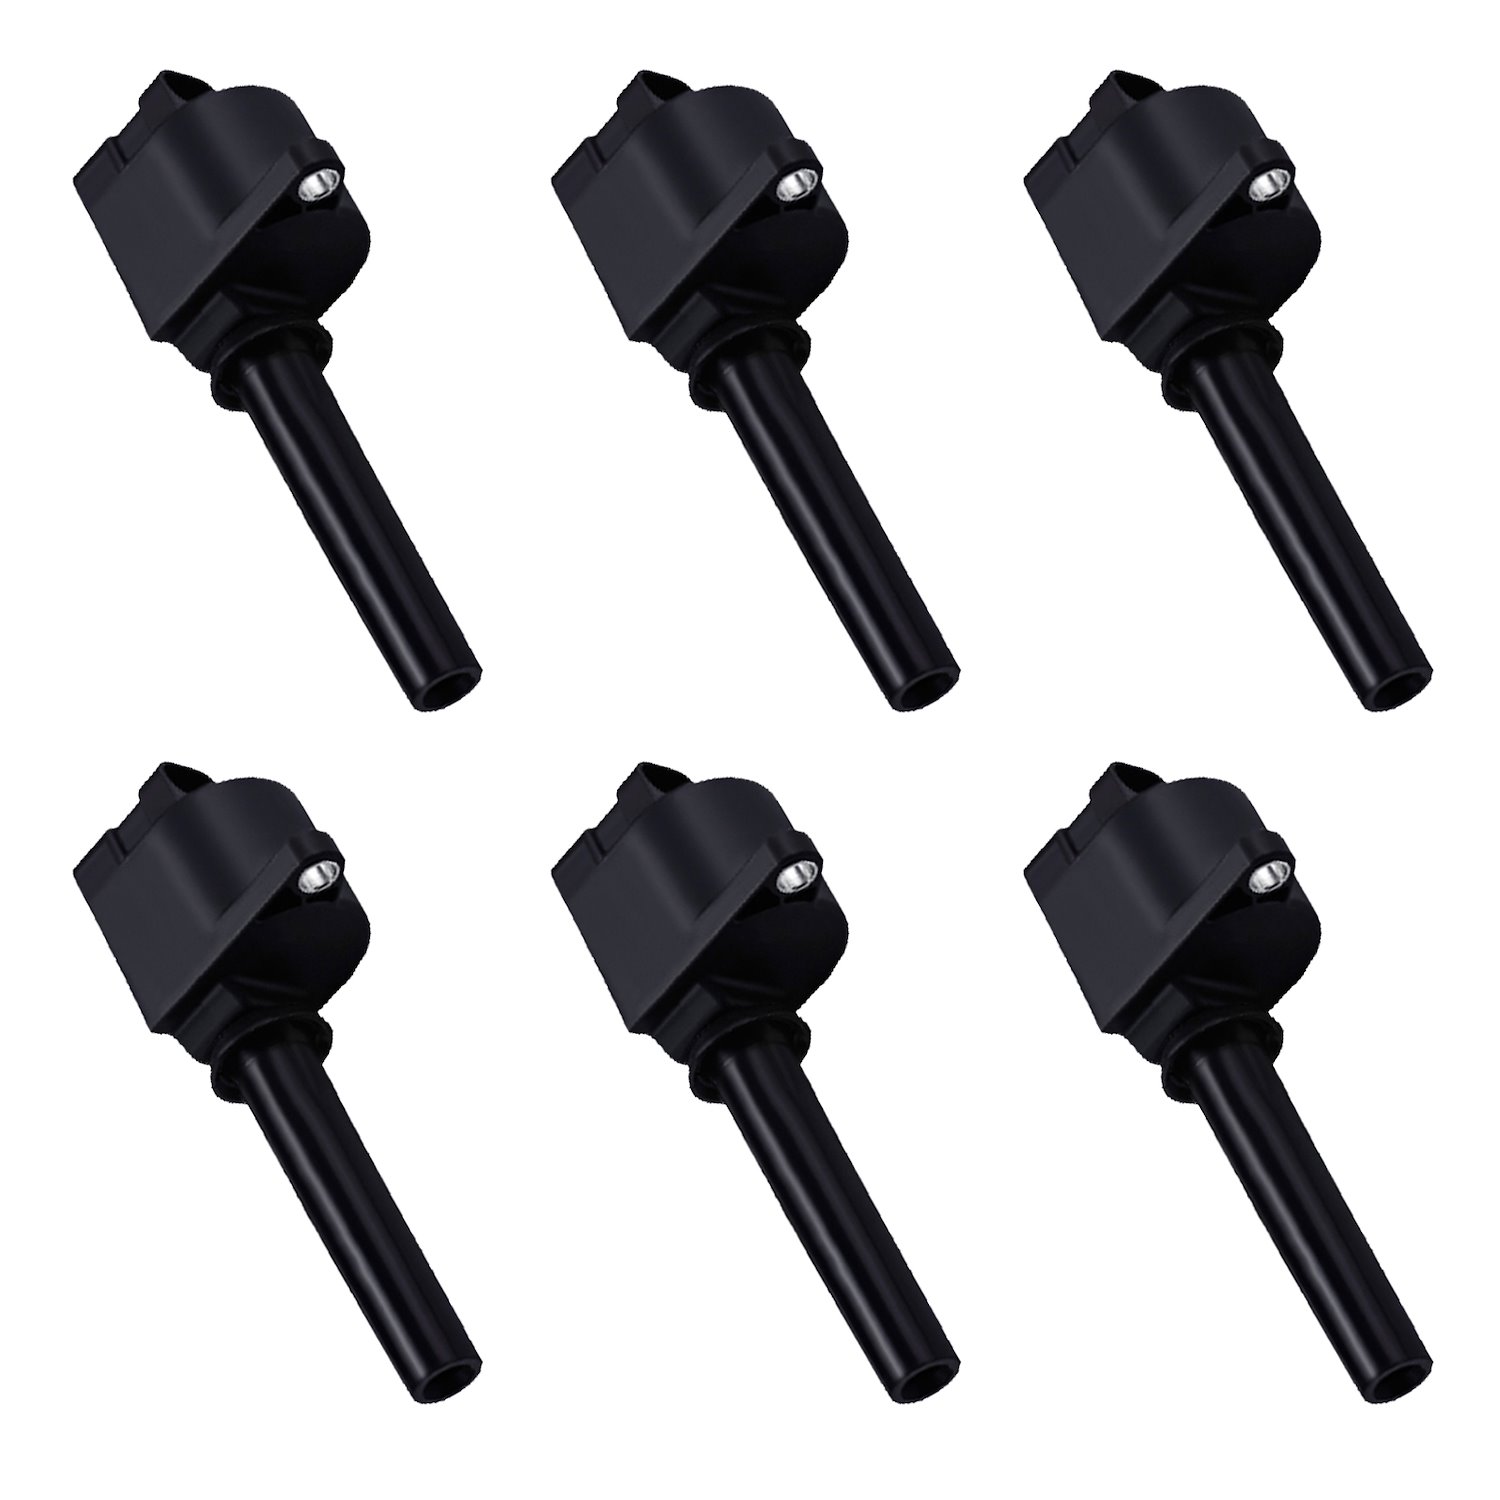 OE Replacement Ignition Coils for Chevrolet Epica Suzuki